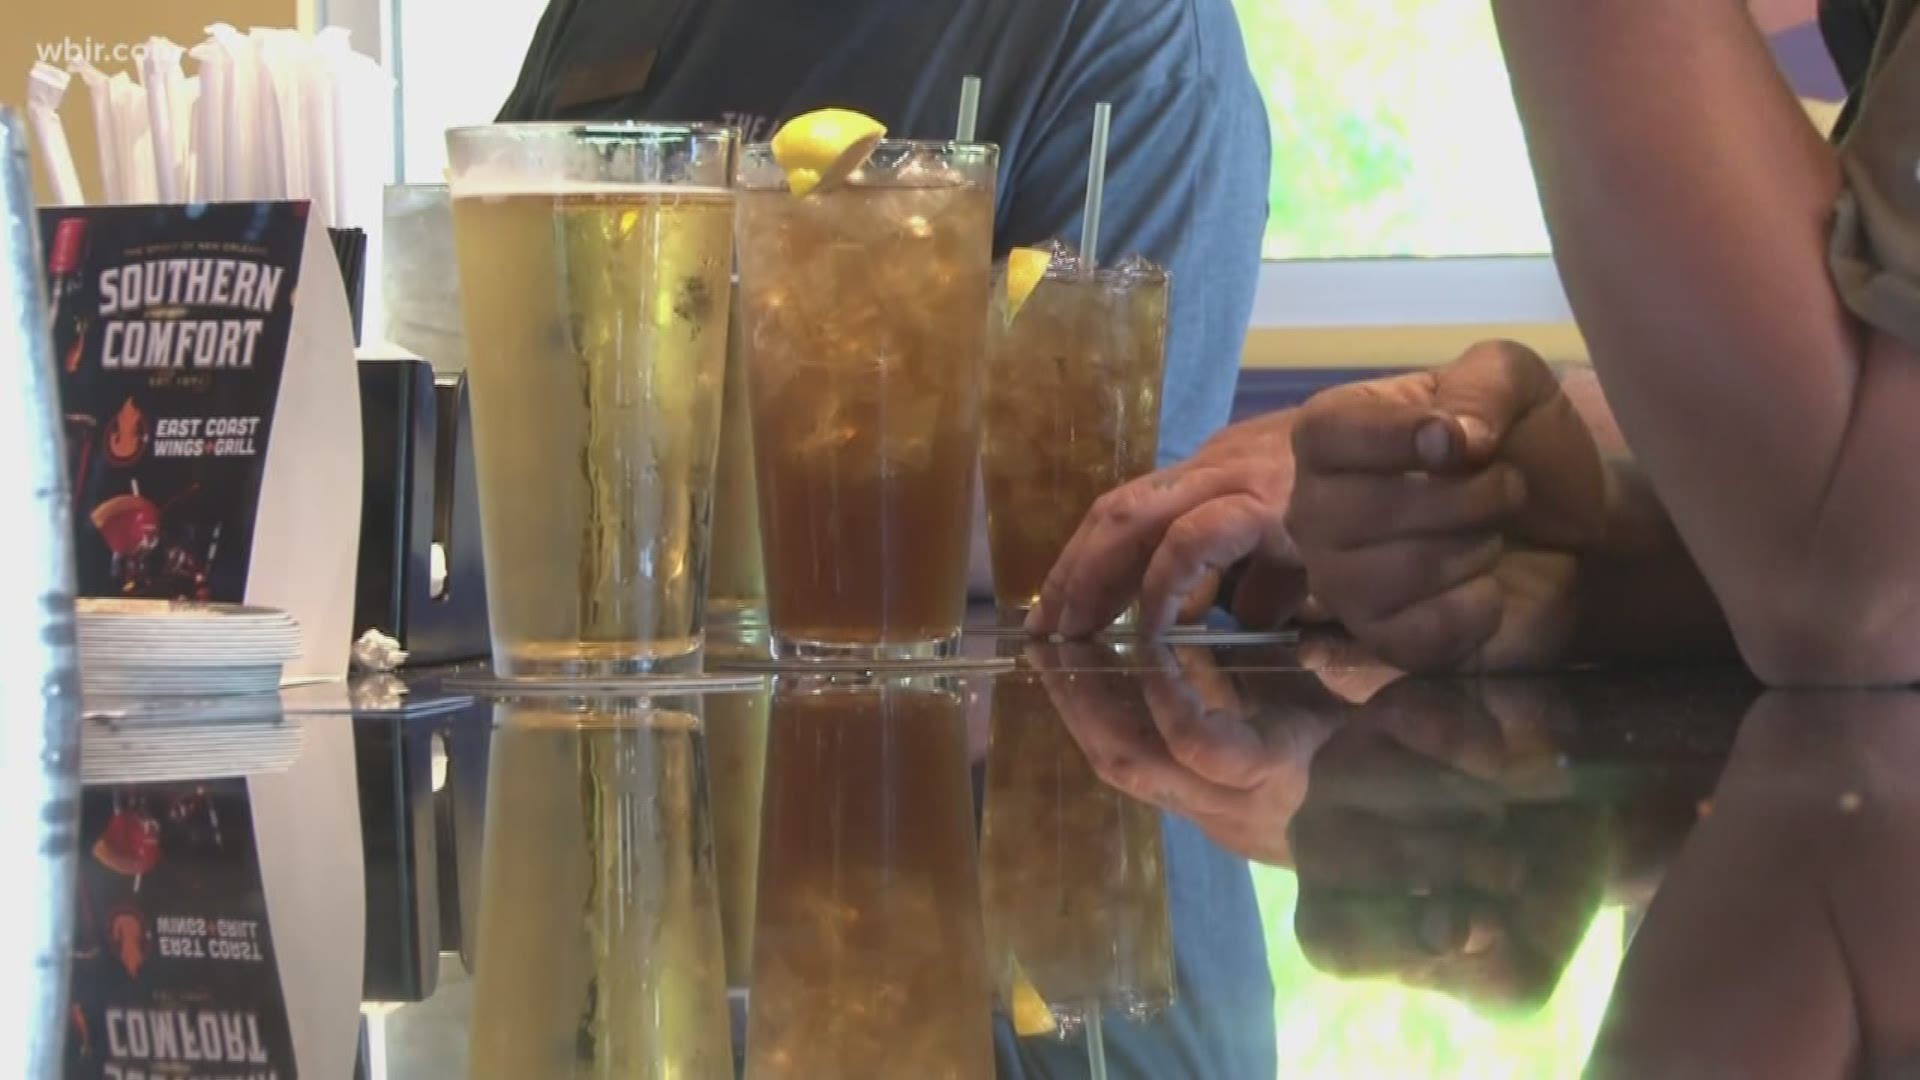 After three rounds, Kingsport is named the winner over New York in the Battle for the Long Island Iced Tea.